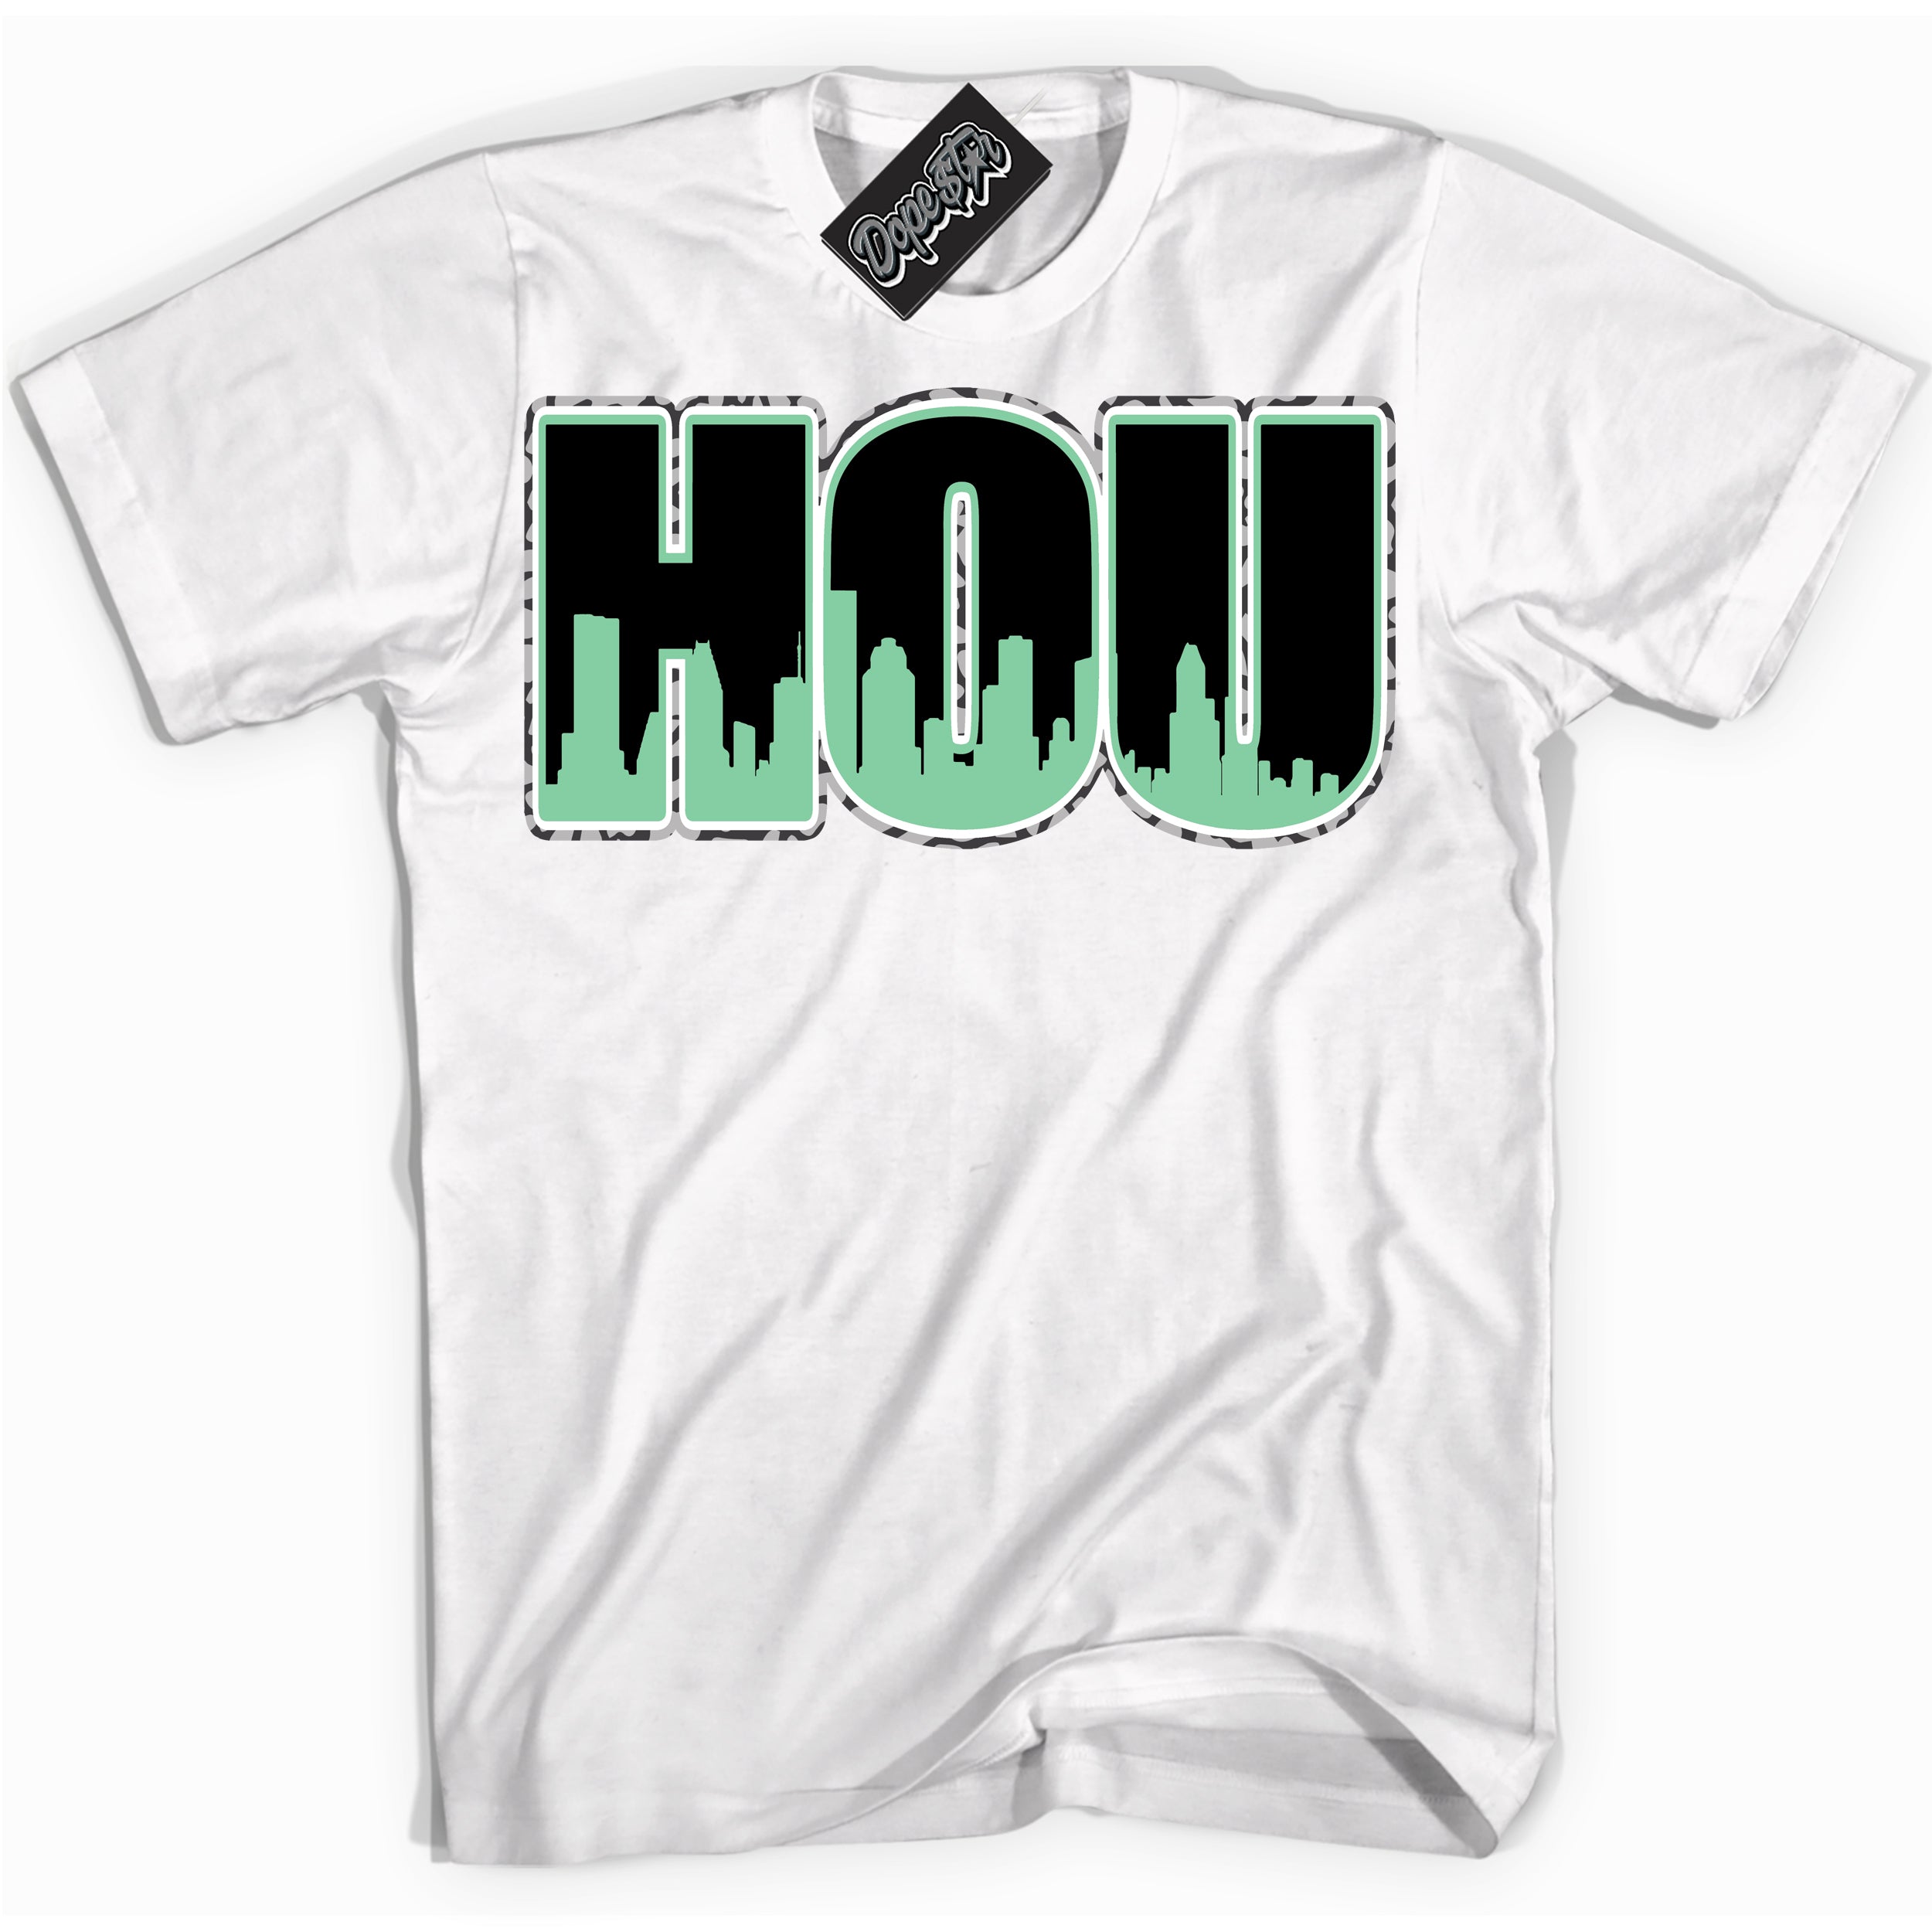 Cool White graphic tee with “ Houston ” design, that perfectly matches Green Glow 3s sneakers 